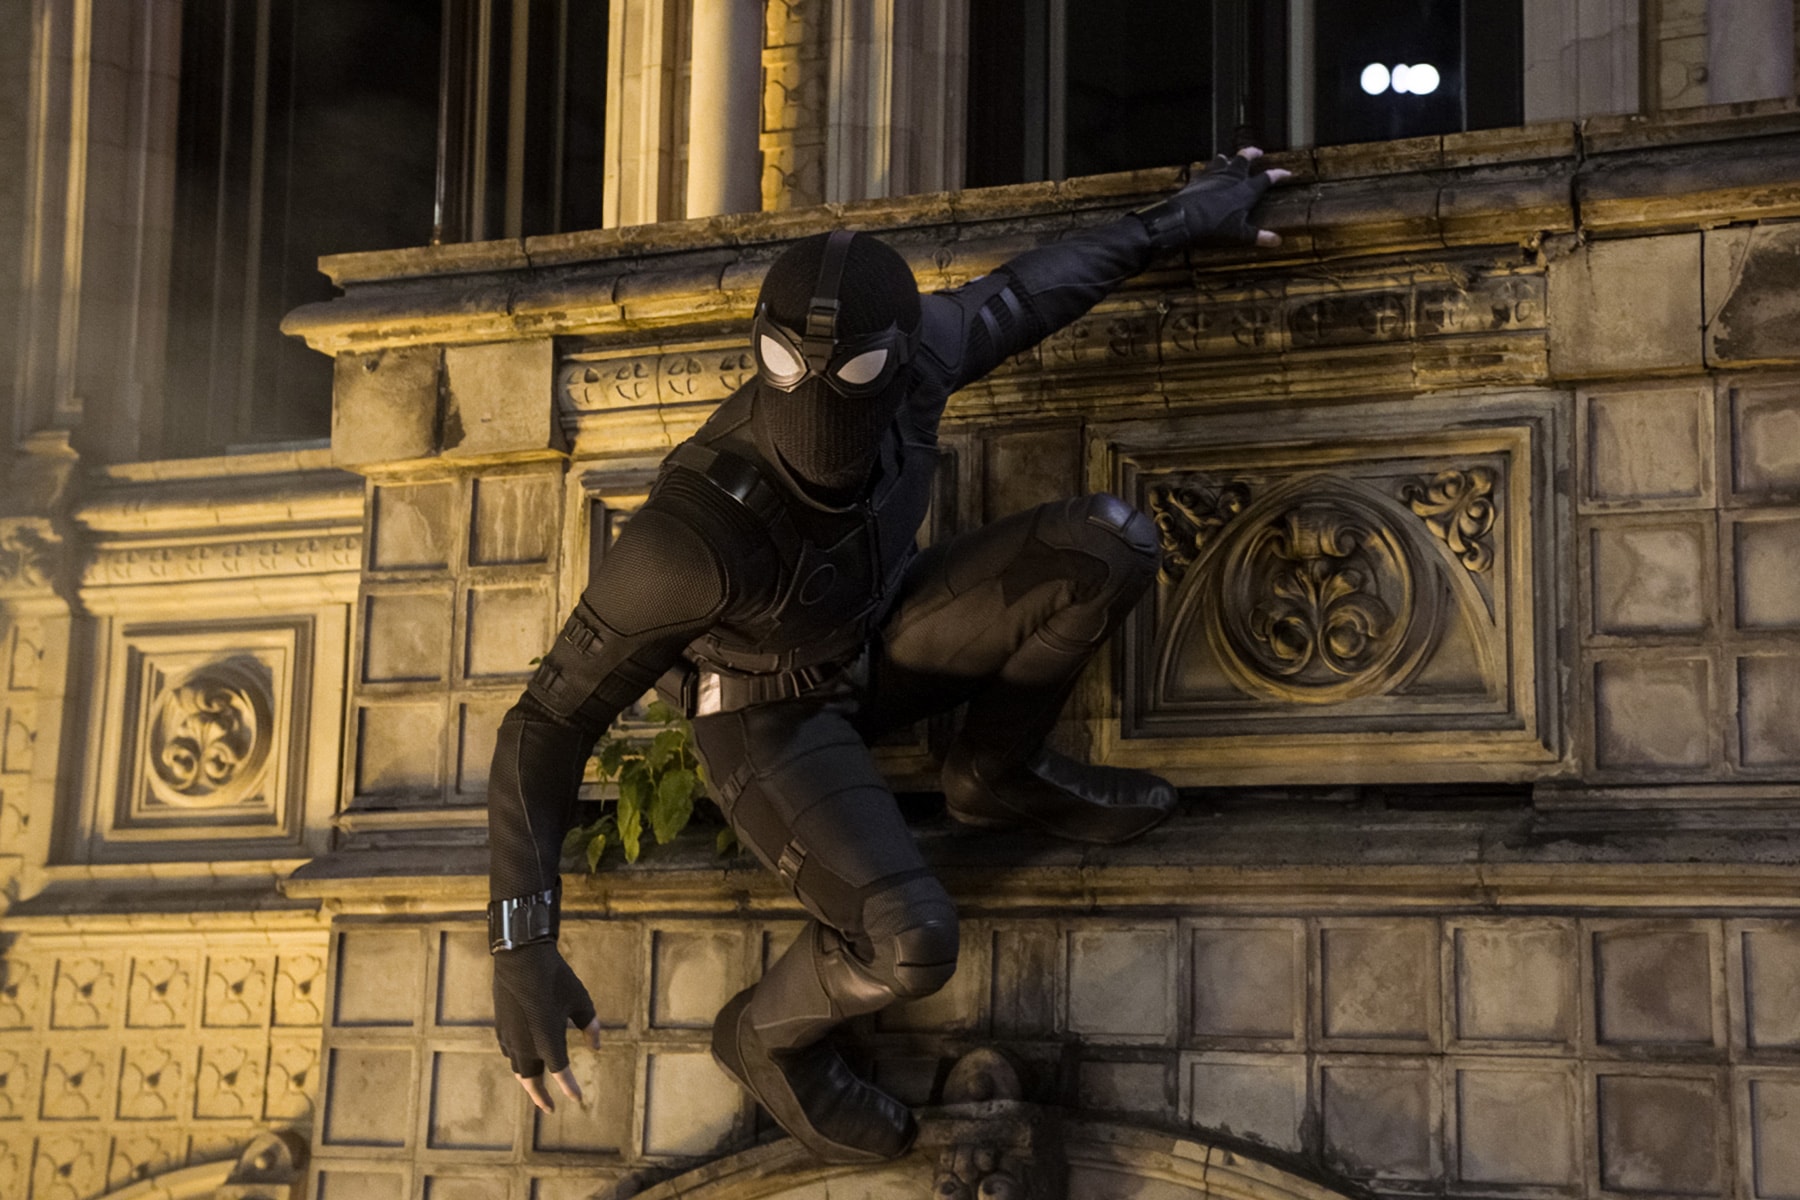 Spider-Man: Far From Home Stealth Suit Spotlighted in New Posters & Video